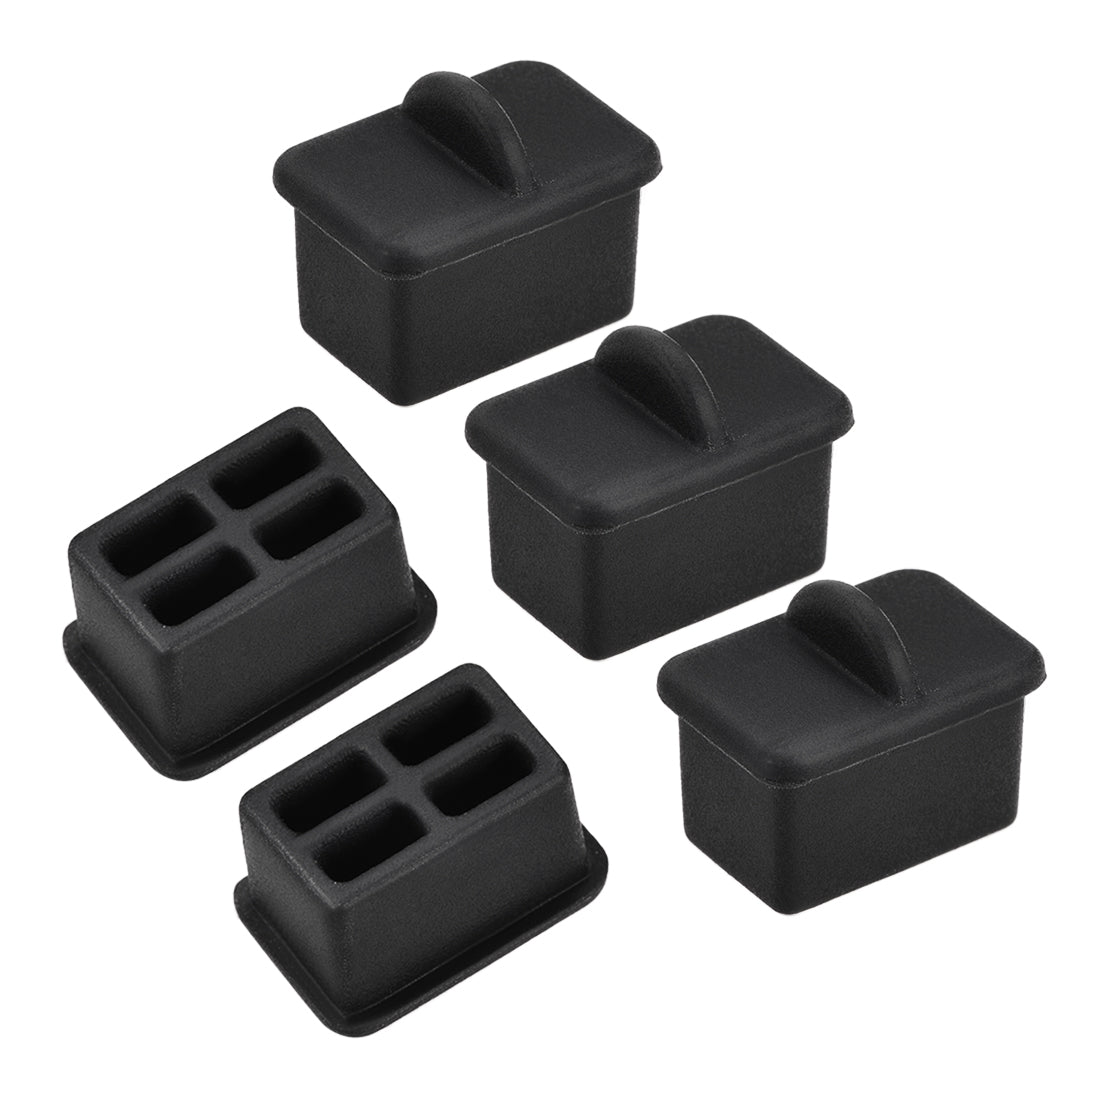 uxcell Uxcell SFP-A Port Anti-Dust Stopper Cap Cover Black Silicone 5pcs